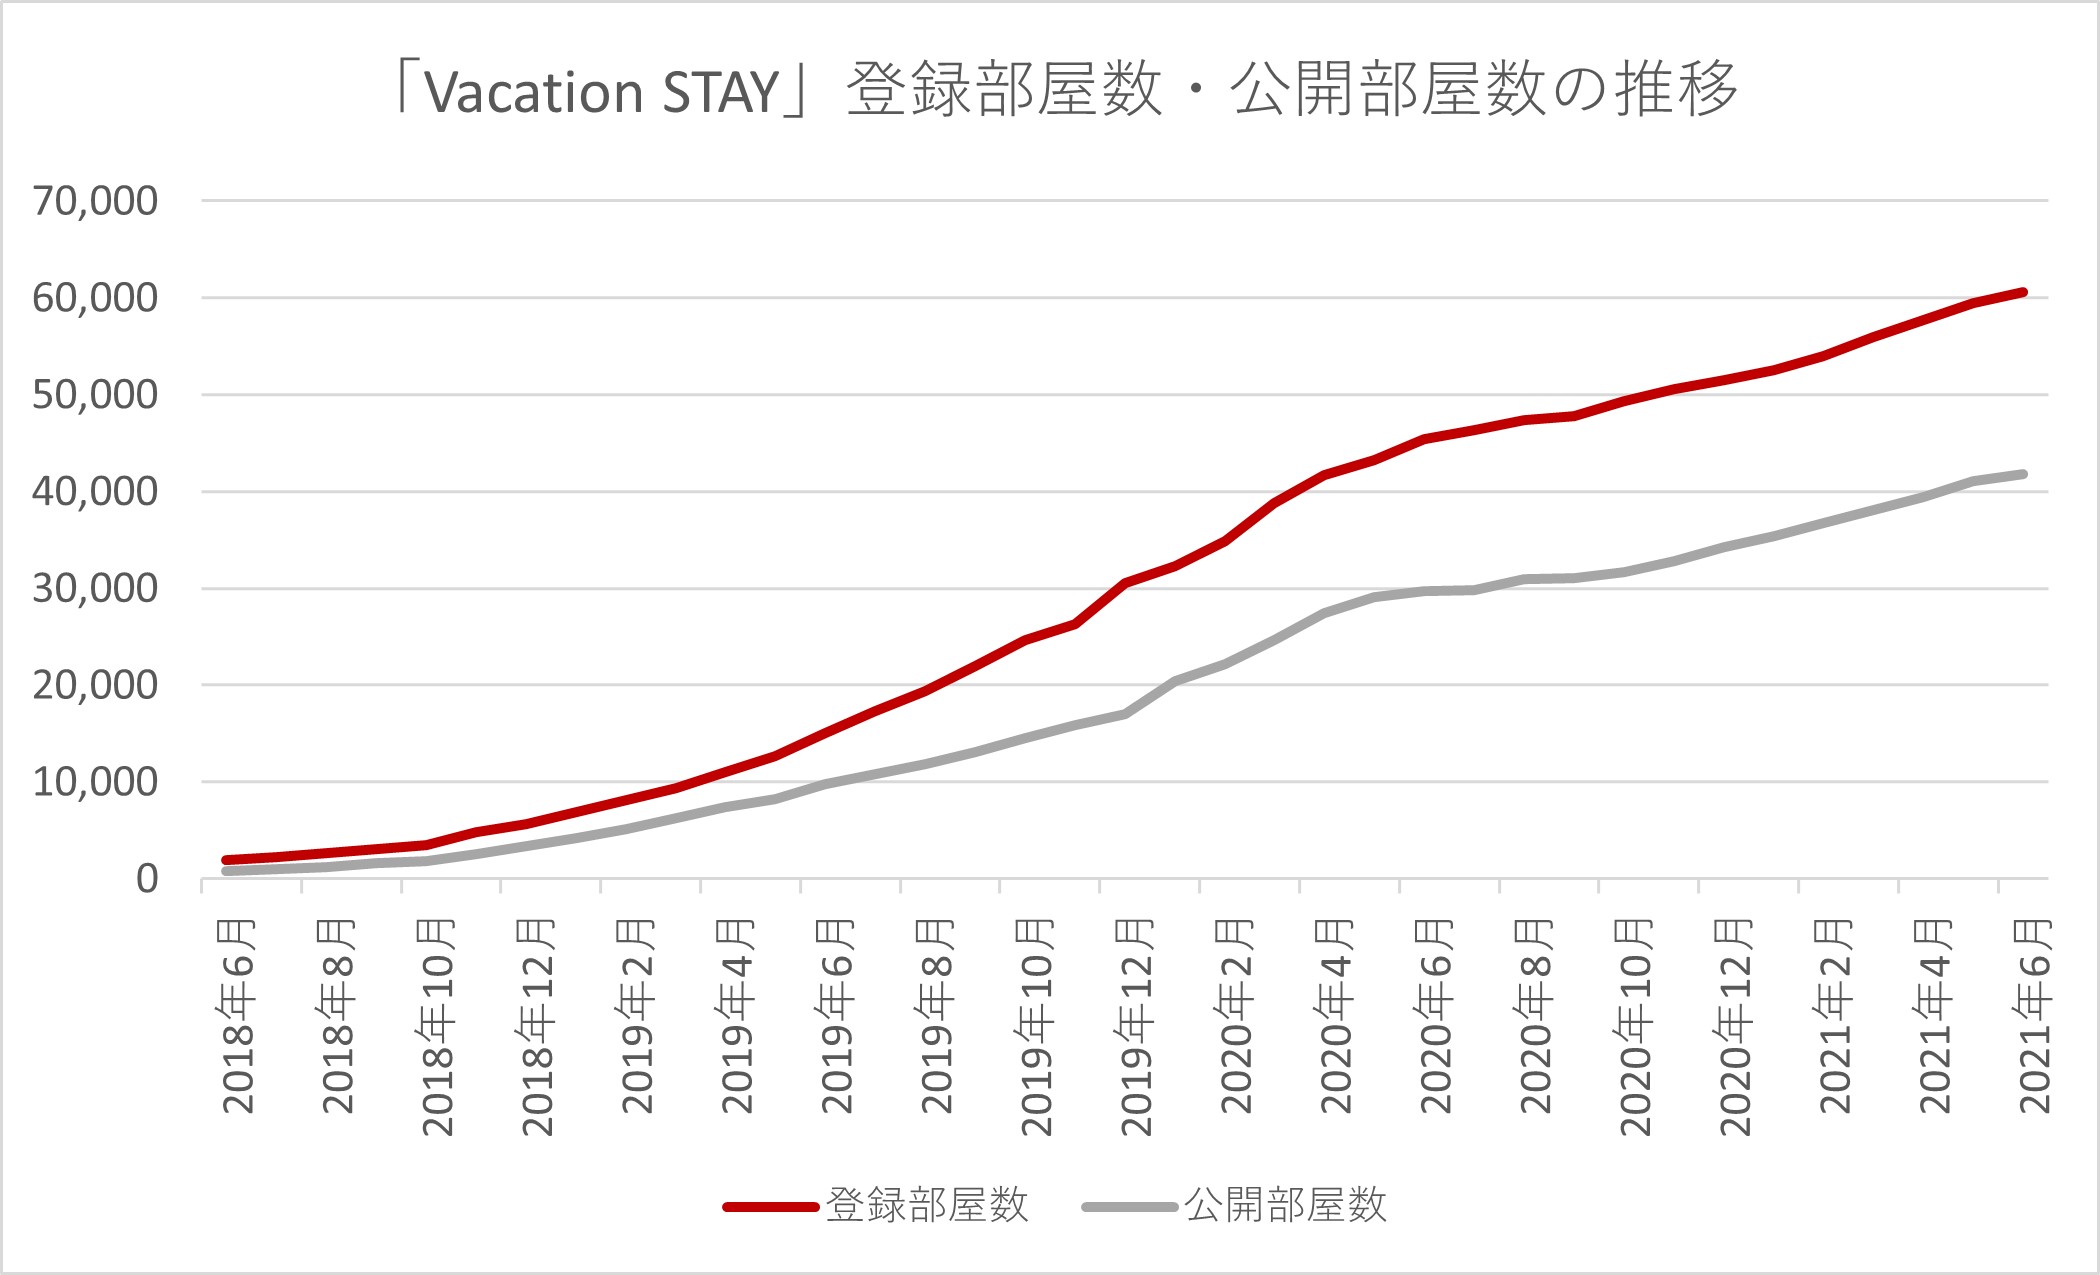 Vacation STAY 登録部屋数・公開部屋数の推移